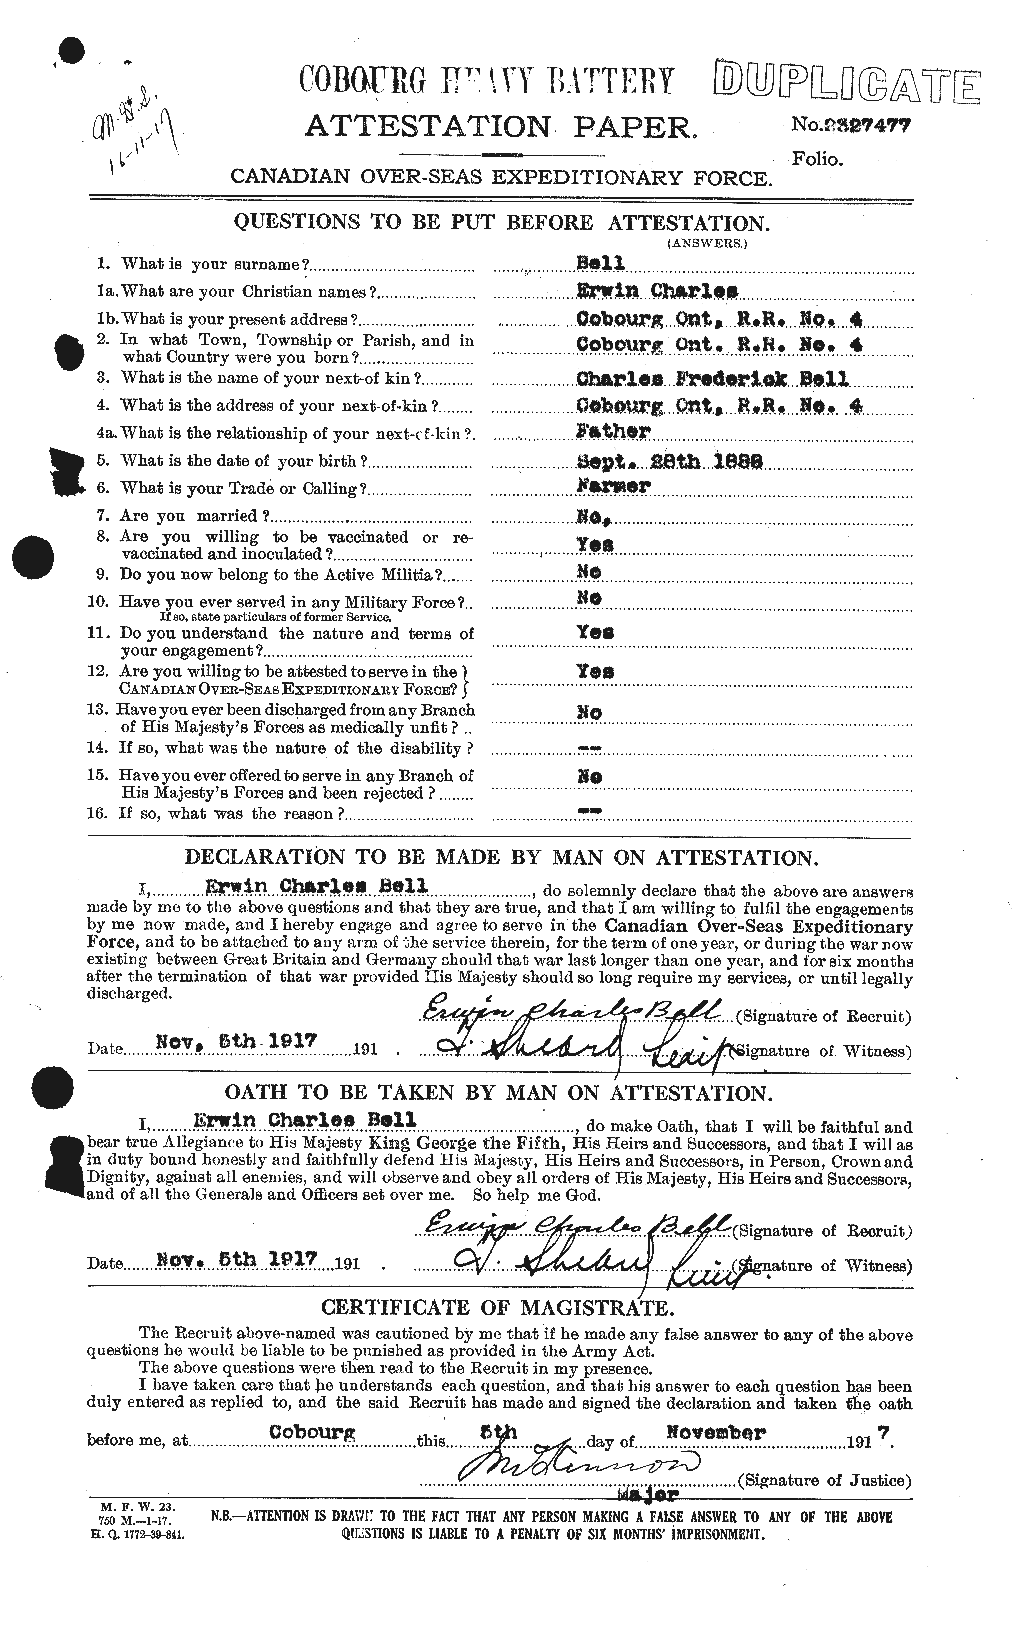 Personnel Records of the First World War - CEF 234078a